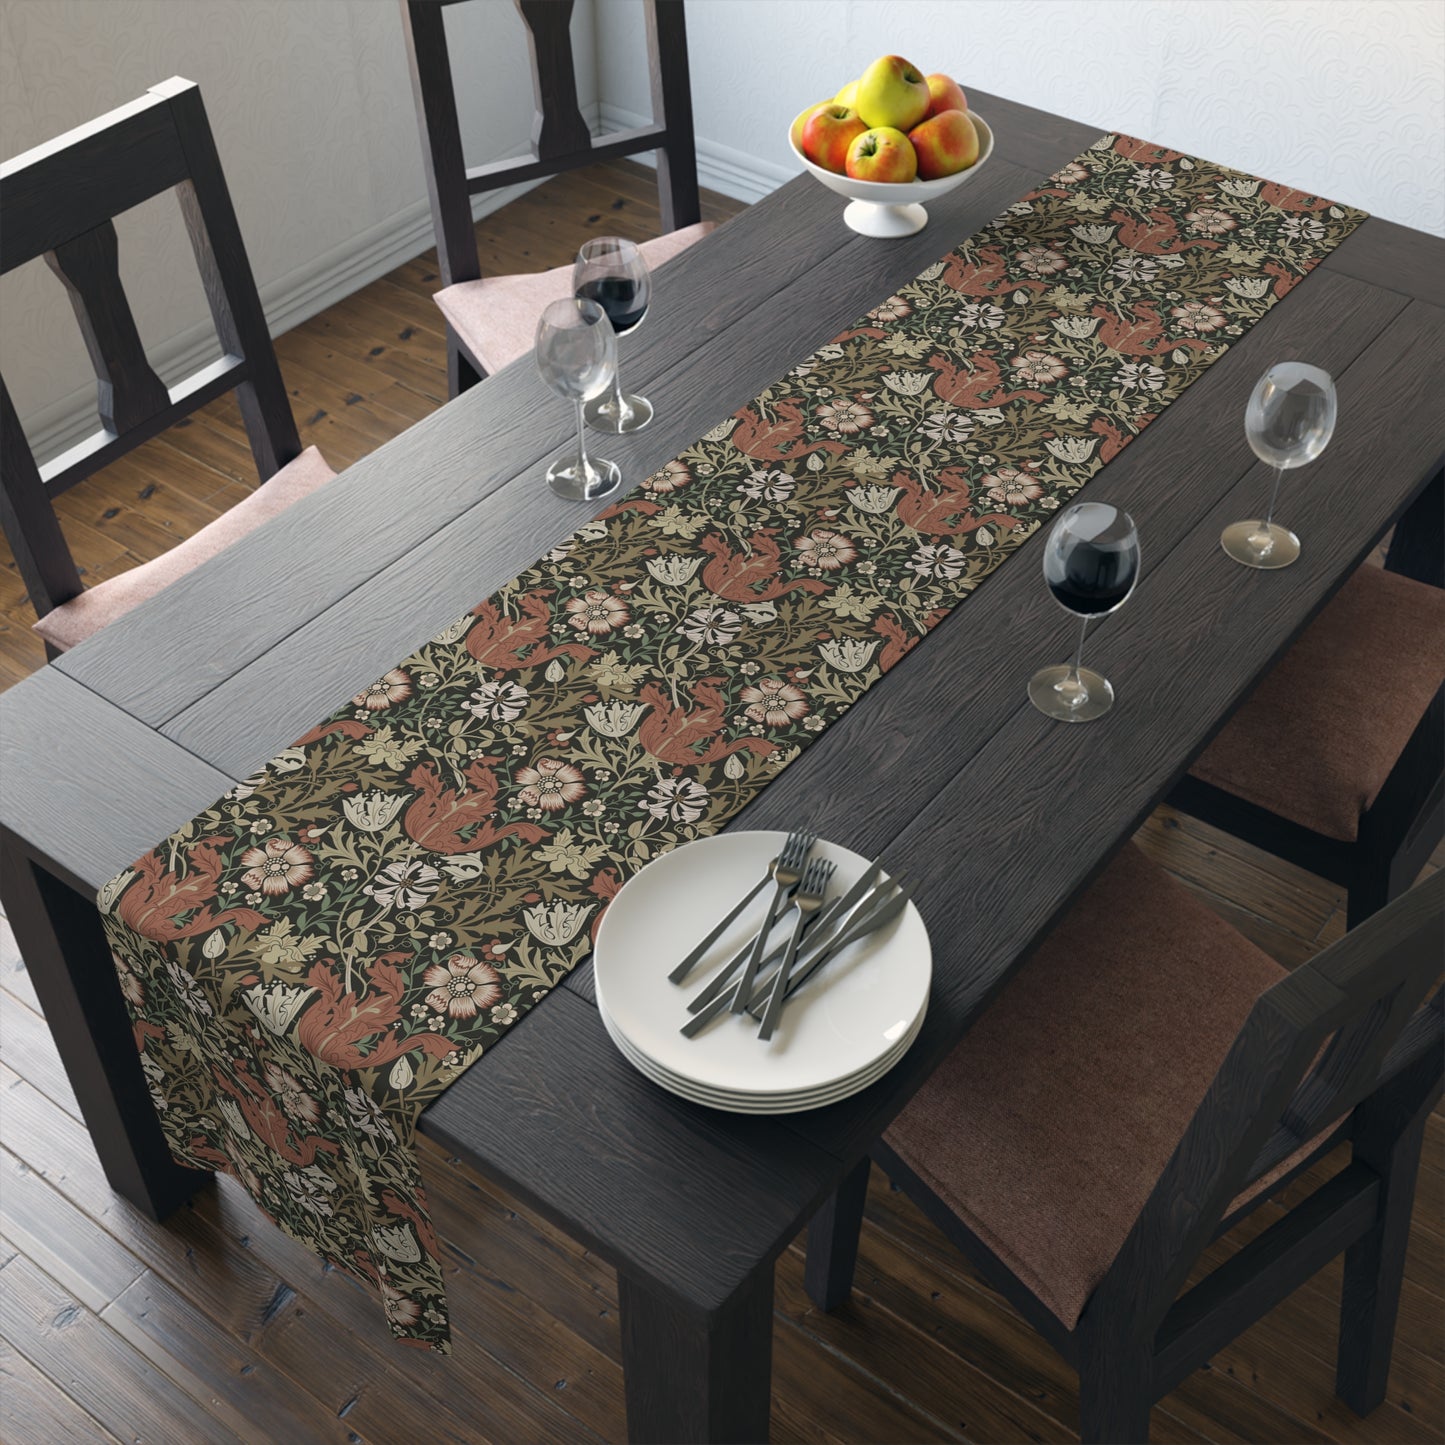 william-morris-co-table-runner-compton-collection-moor-cottage-21